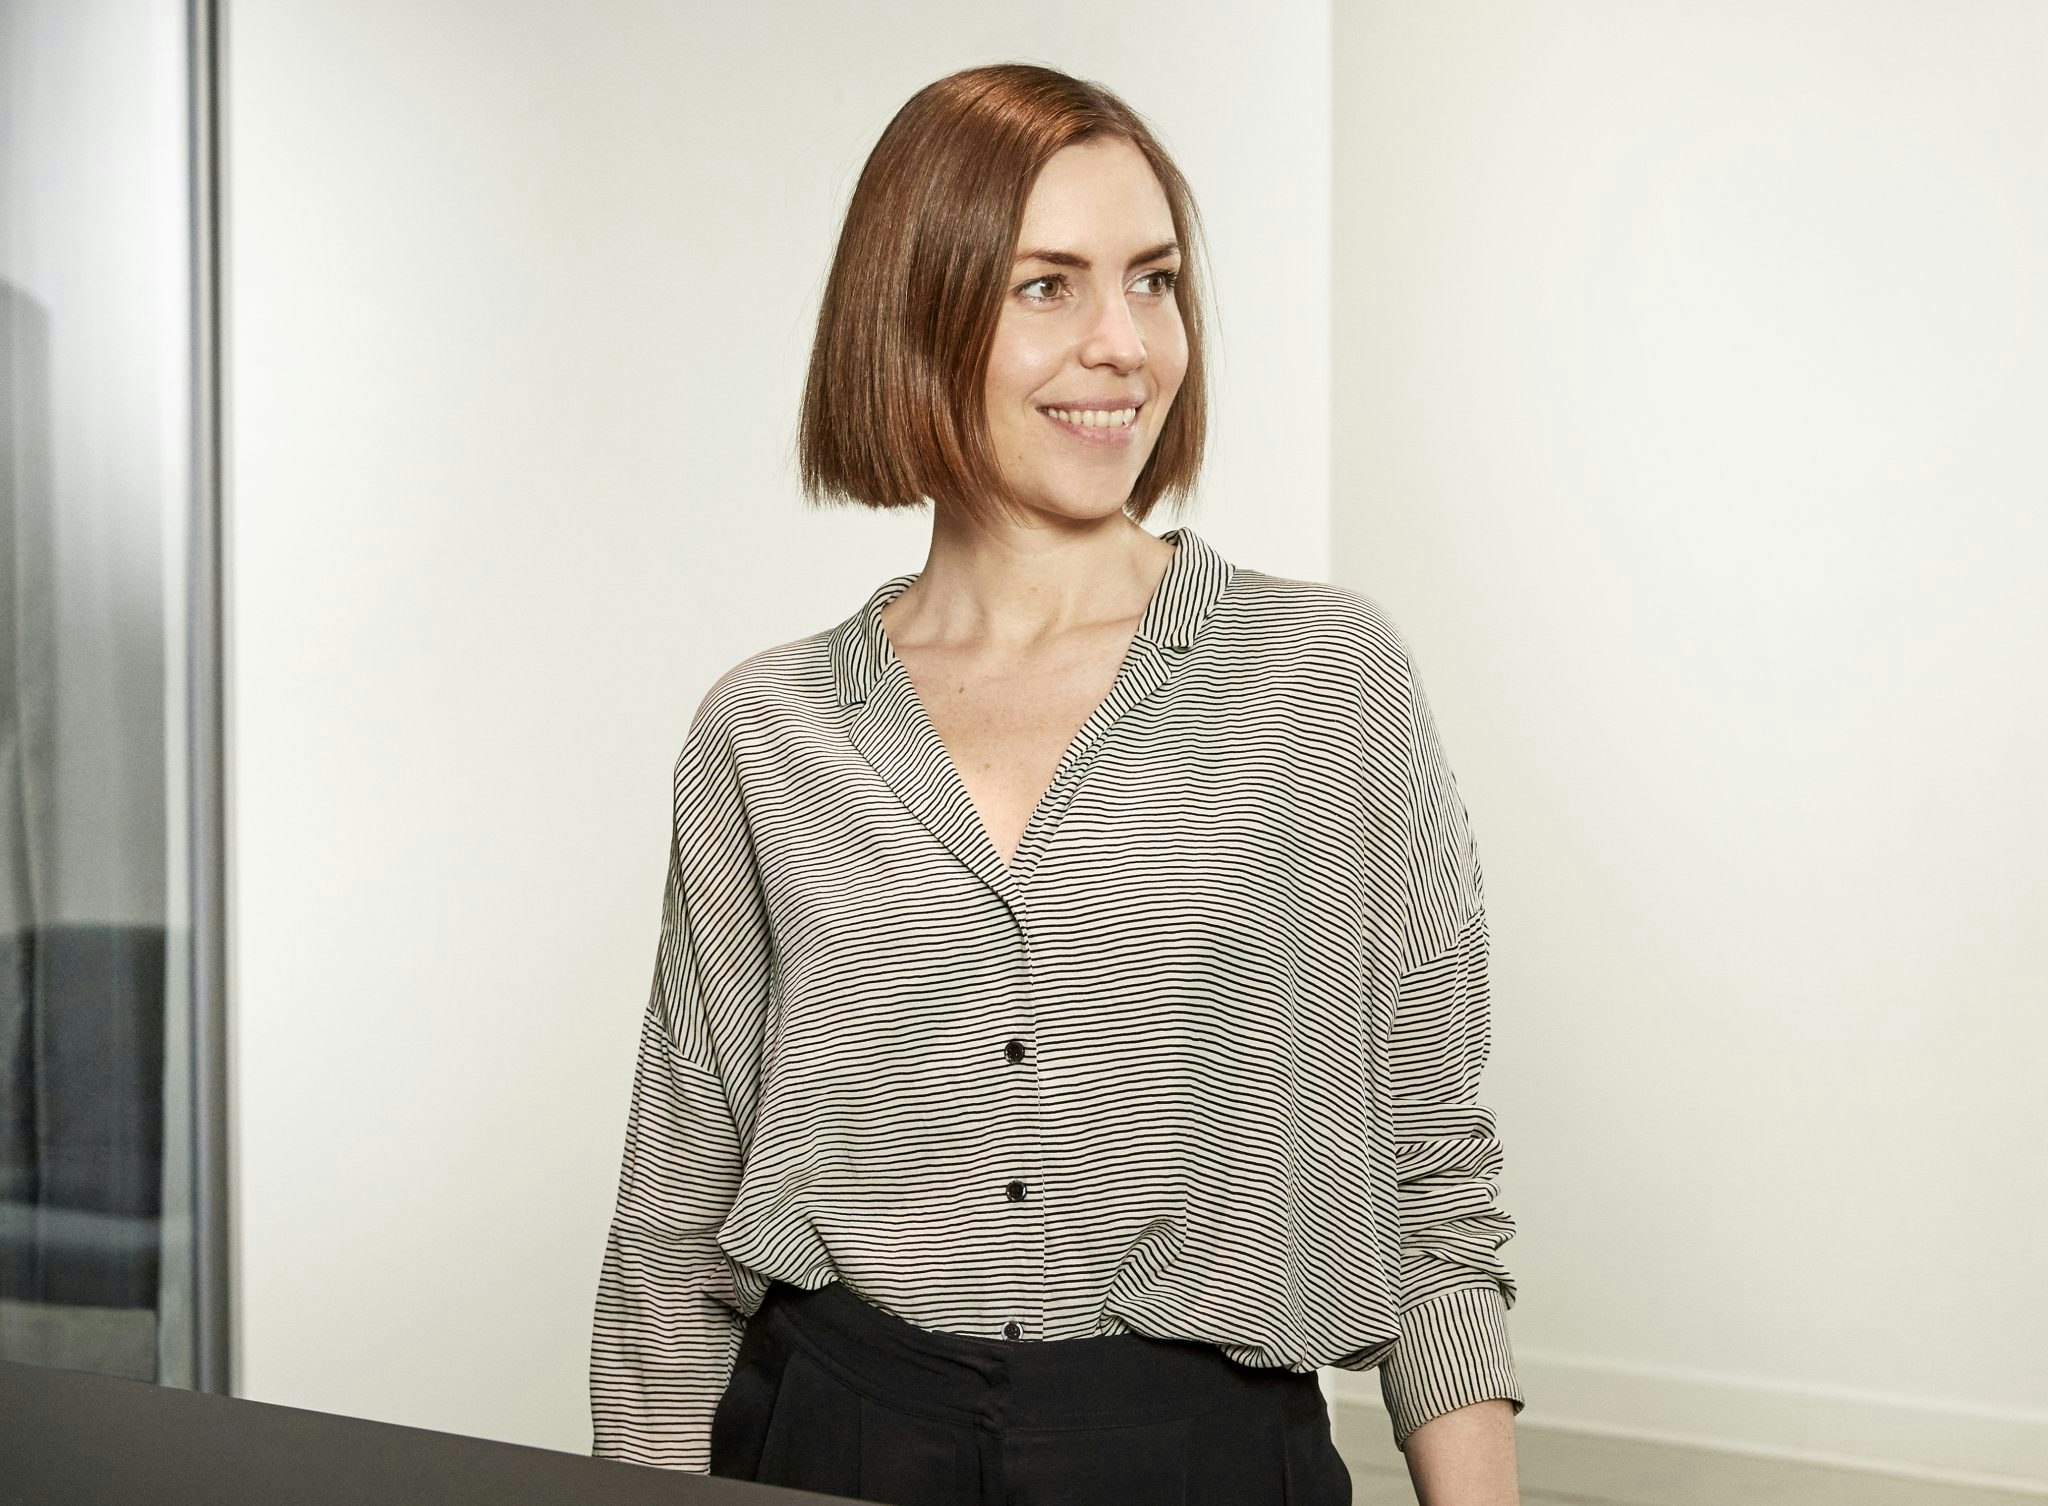 Helene Lassen Nørlem, founder and CEO at ADHD planning app Tiimo